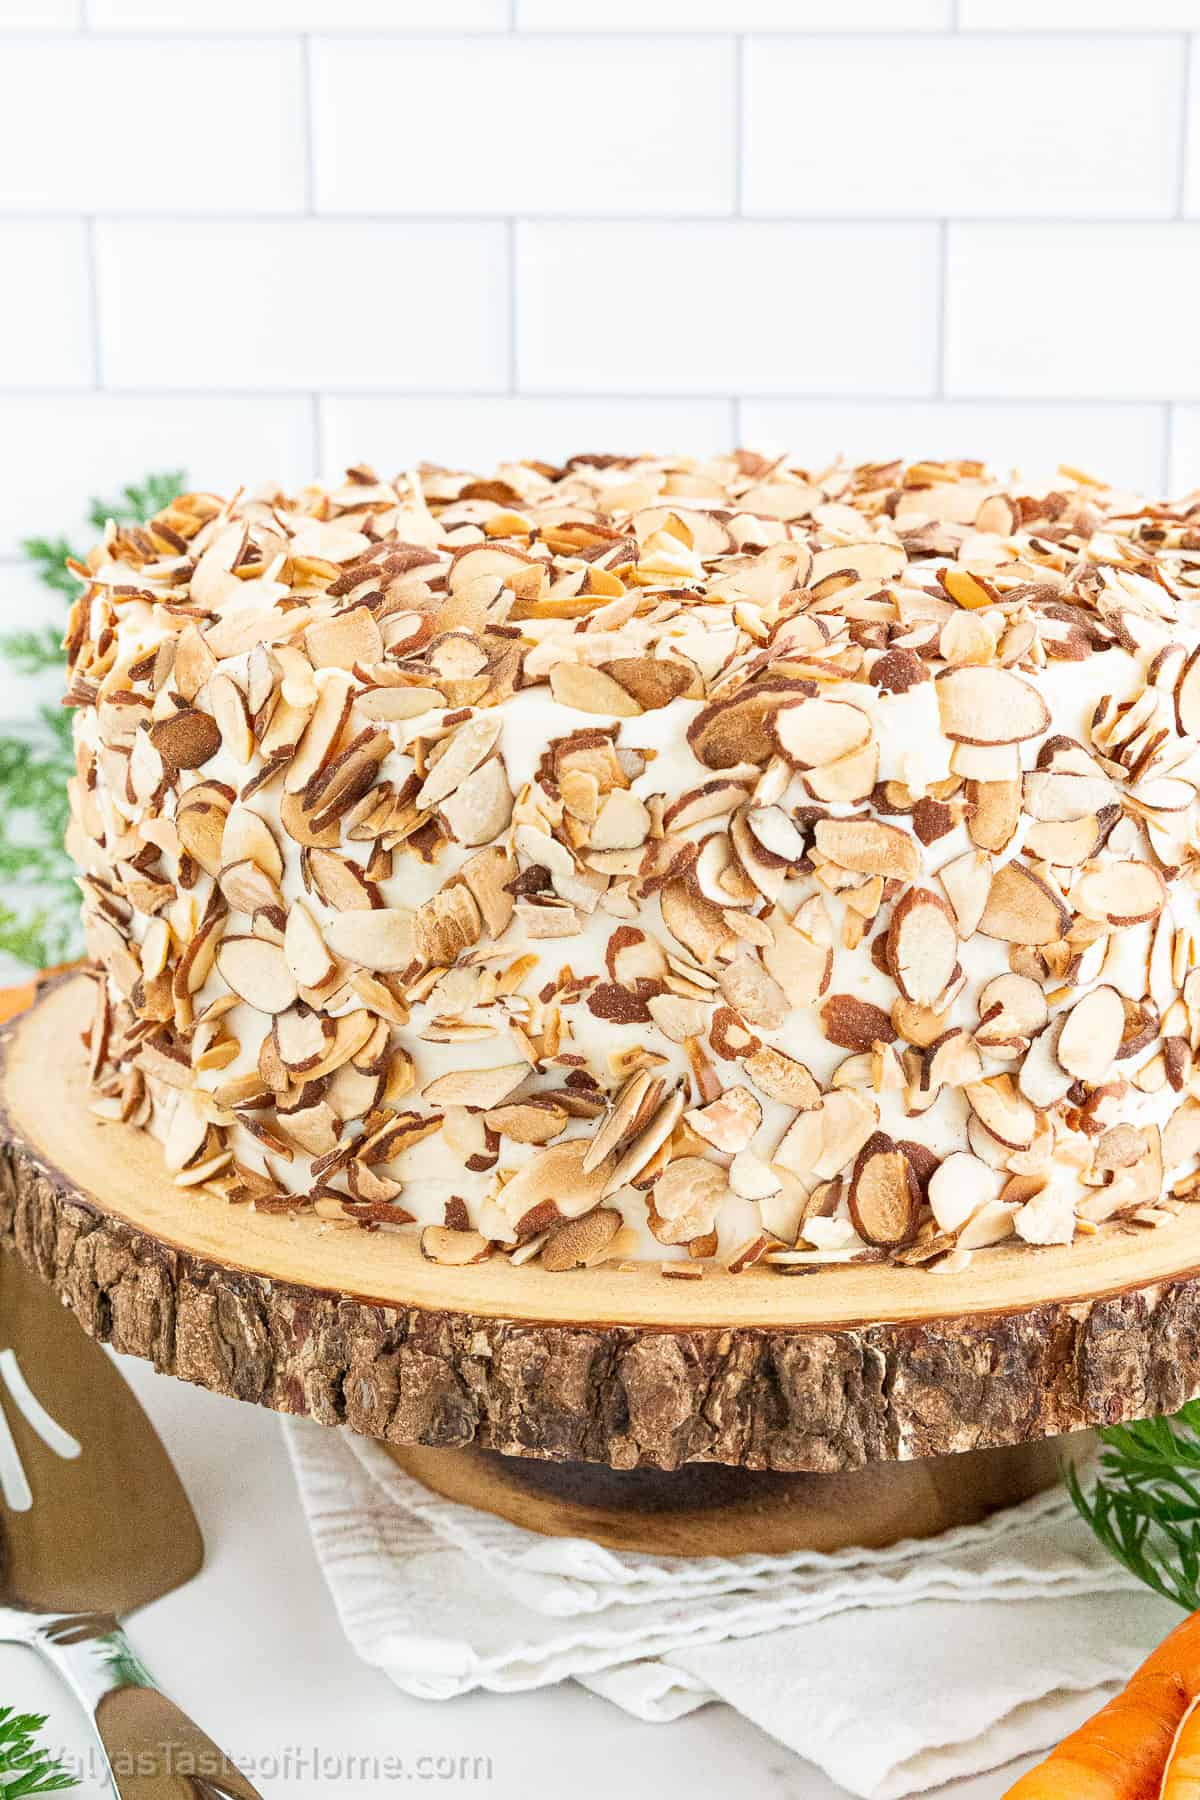 This isn't any ordinary carrot cake recipe, but a healthy version that's packed with ingredients to add more nutritional value to your cake while still making it taste good (or even better!). 